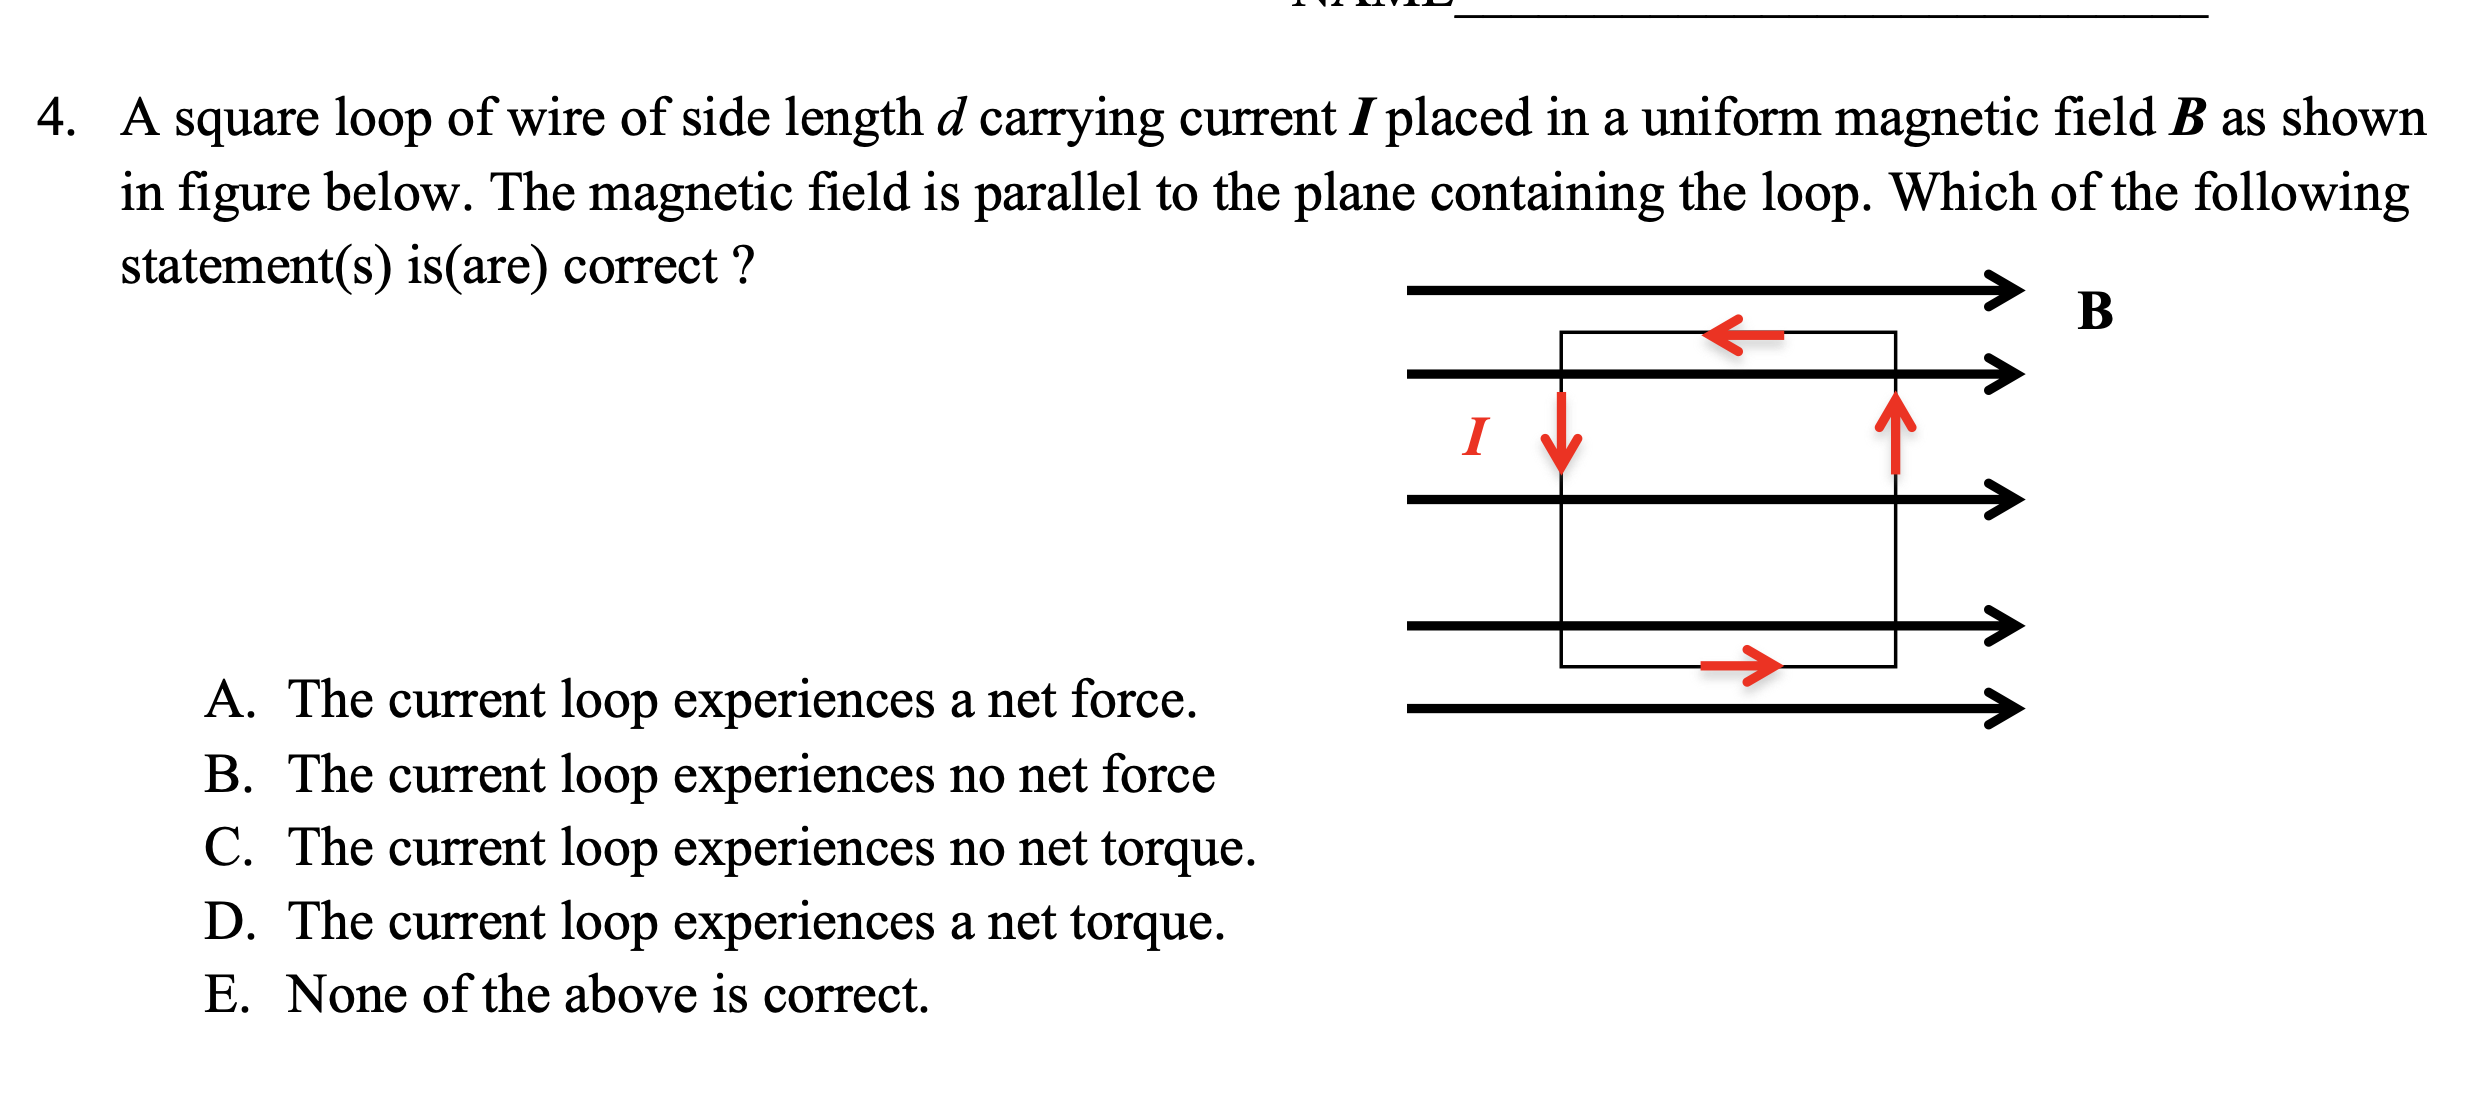 4. A square loop of wire of side length d carrying current I placed in a uniform magnetic field B as shown
in figure below. The magnetic field is parallel to the plane containing the loop. Which of the following
statement(s) is(are) correct ?
B
A. The current loop experiences a net force.
B. The current loop experiences no net force
C. The current loop experiences no net torque.
D. The current loop experiences a net torque.
E. None of the above is correct.
